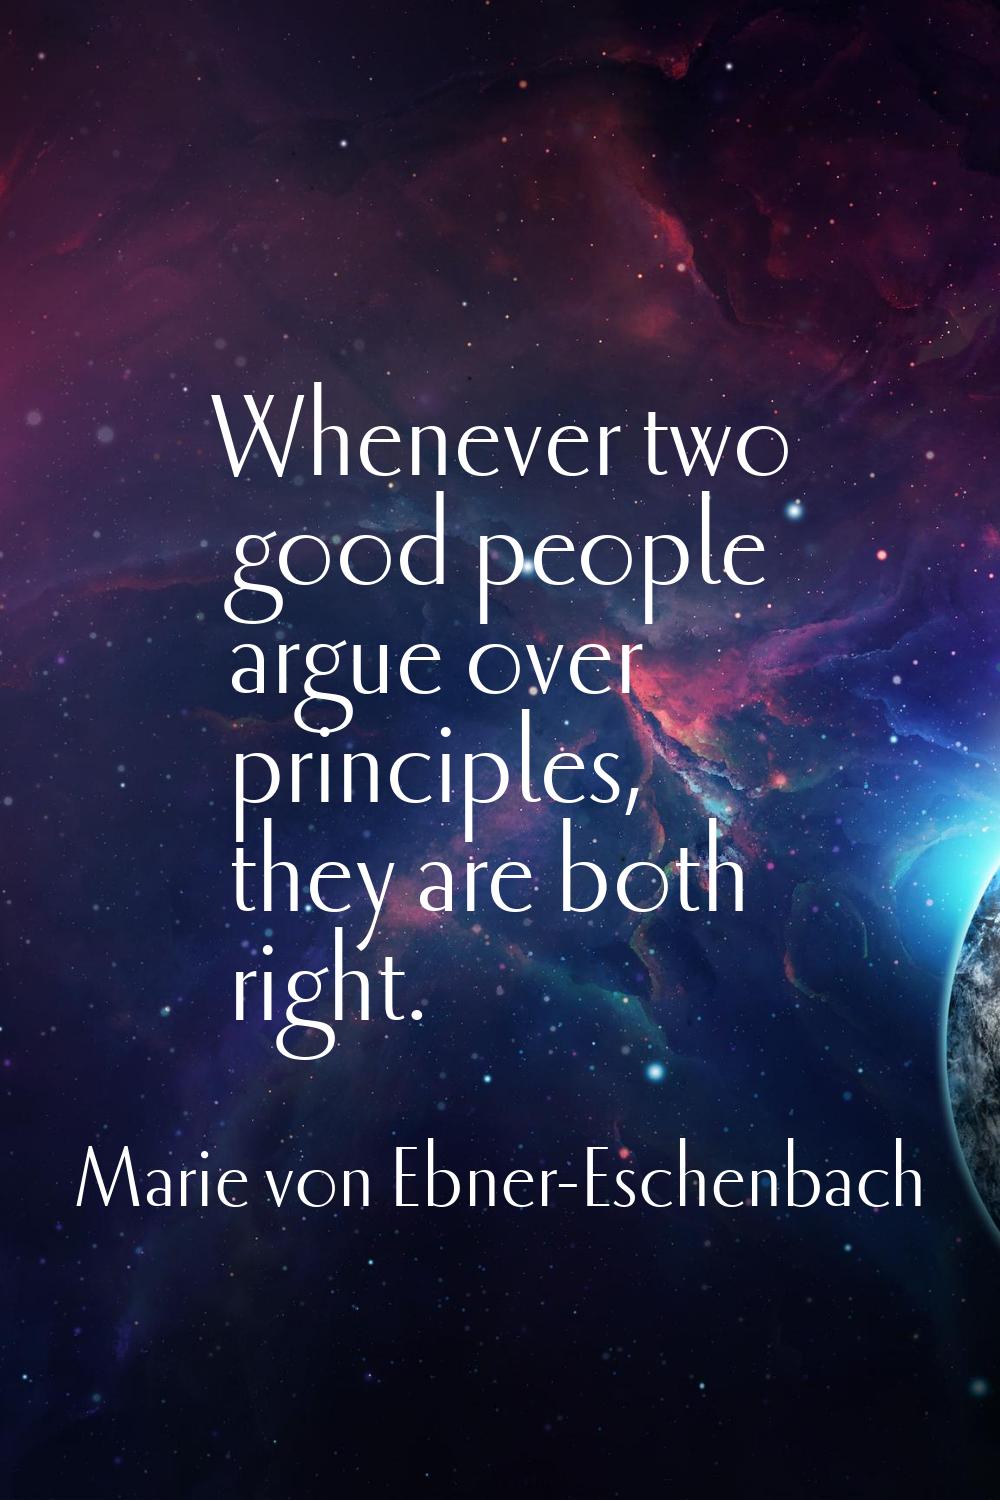 Whenever two good people argue over principles, they are both right.